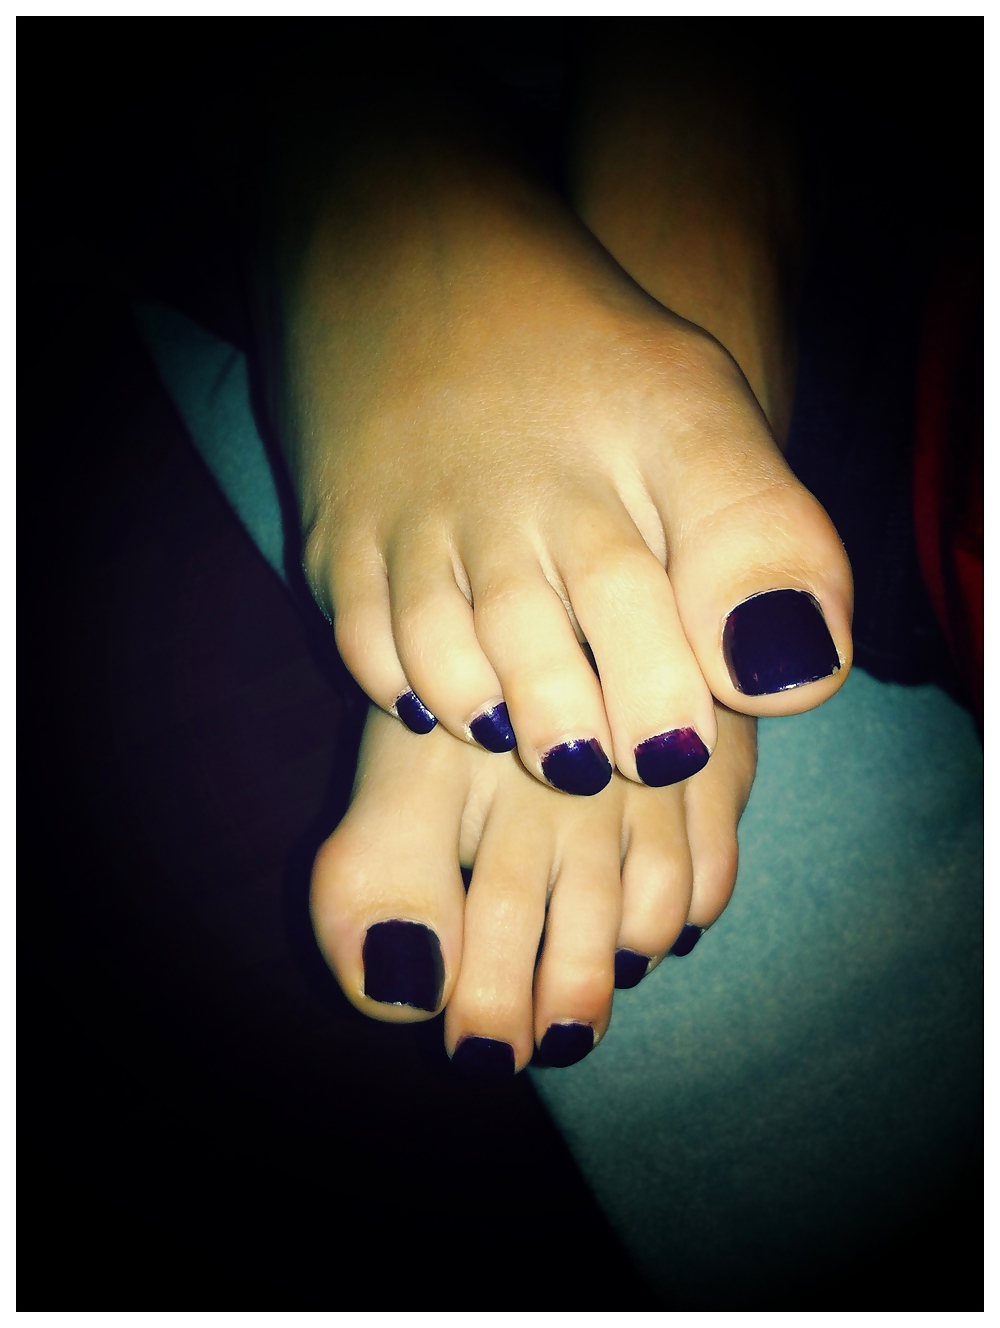 Jackie's dark purple toes and sexy foot
 #14692935